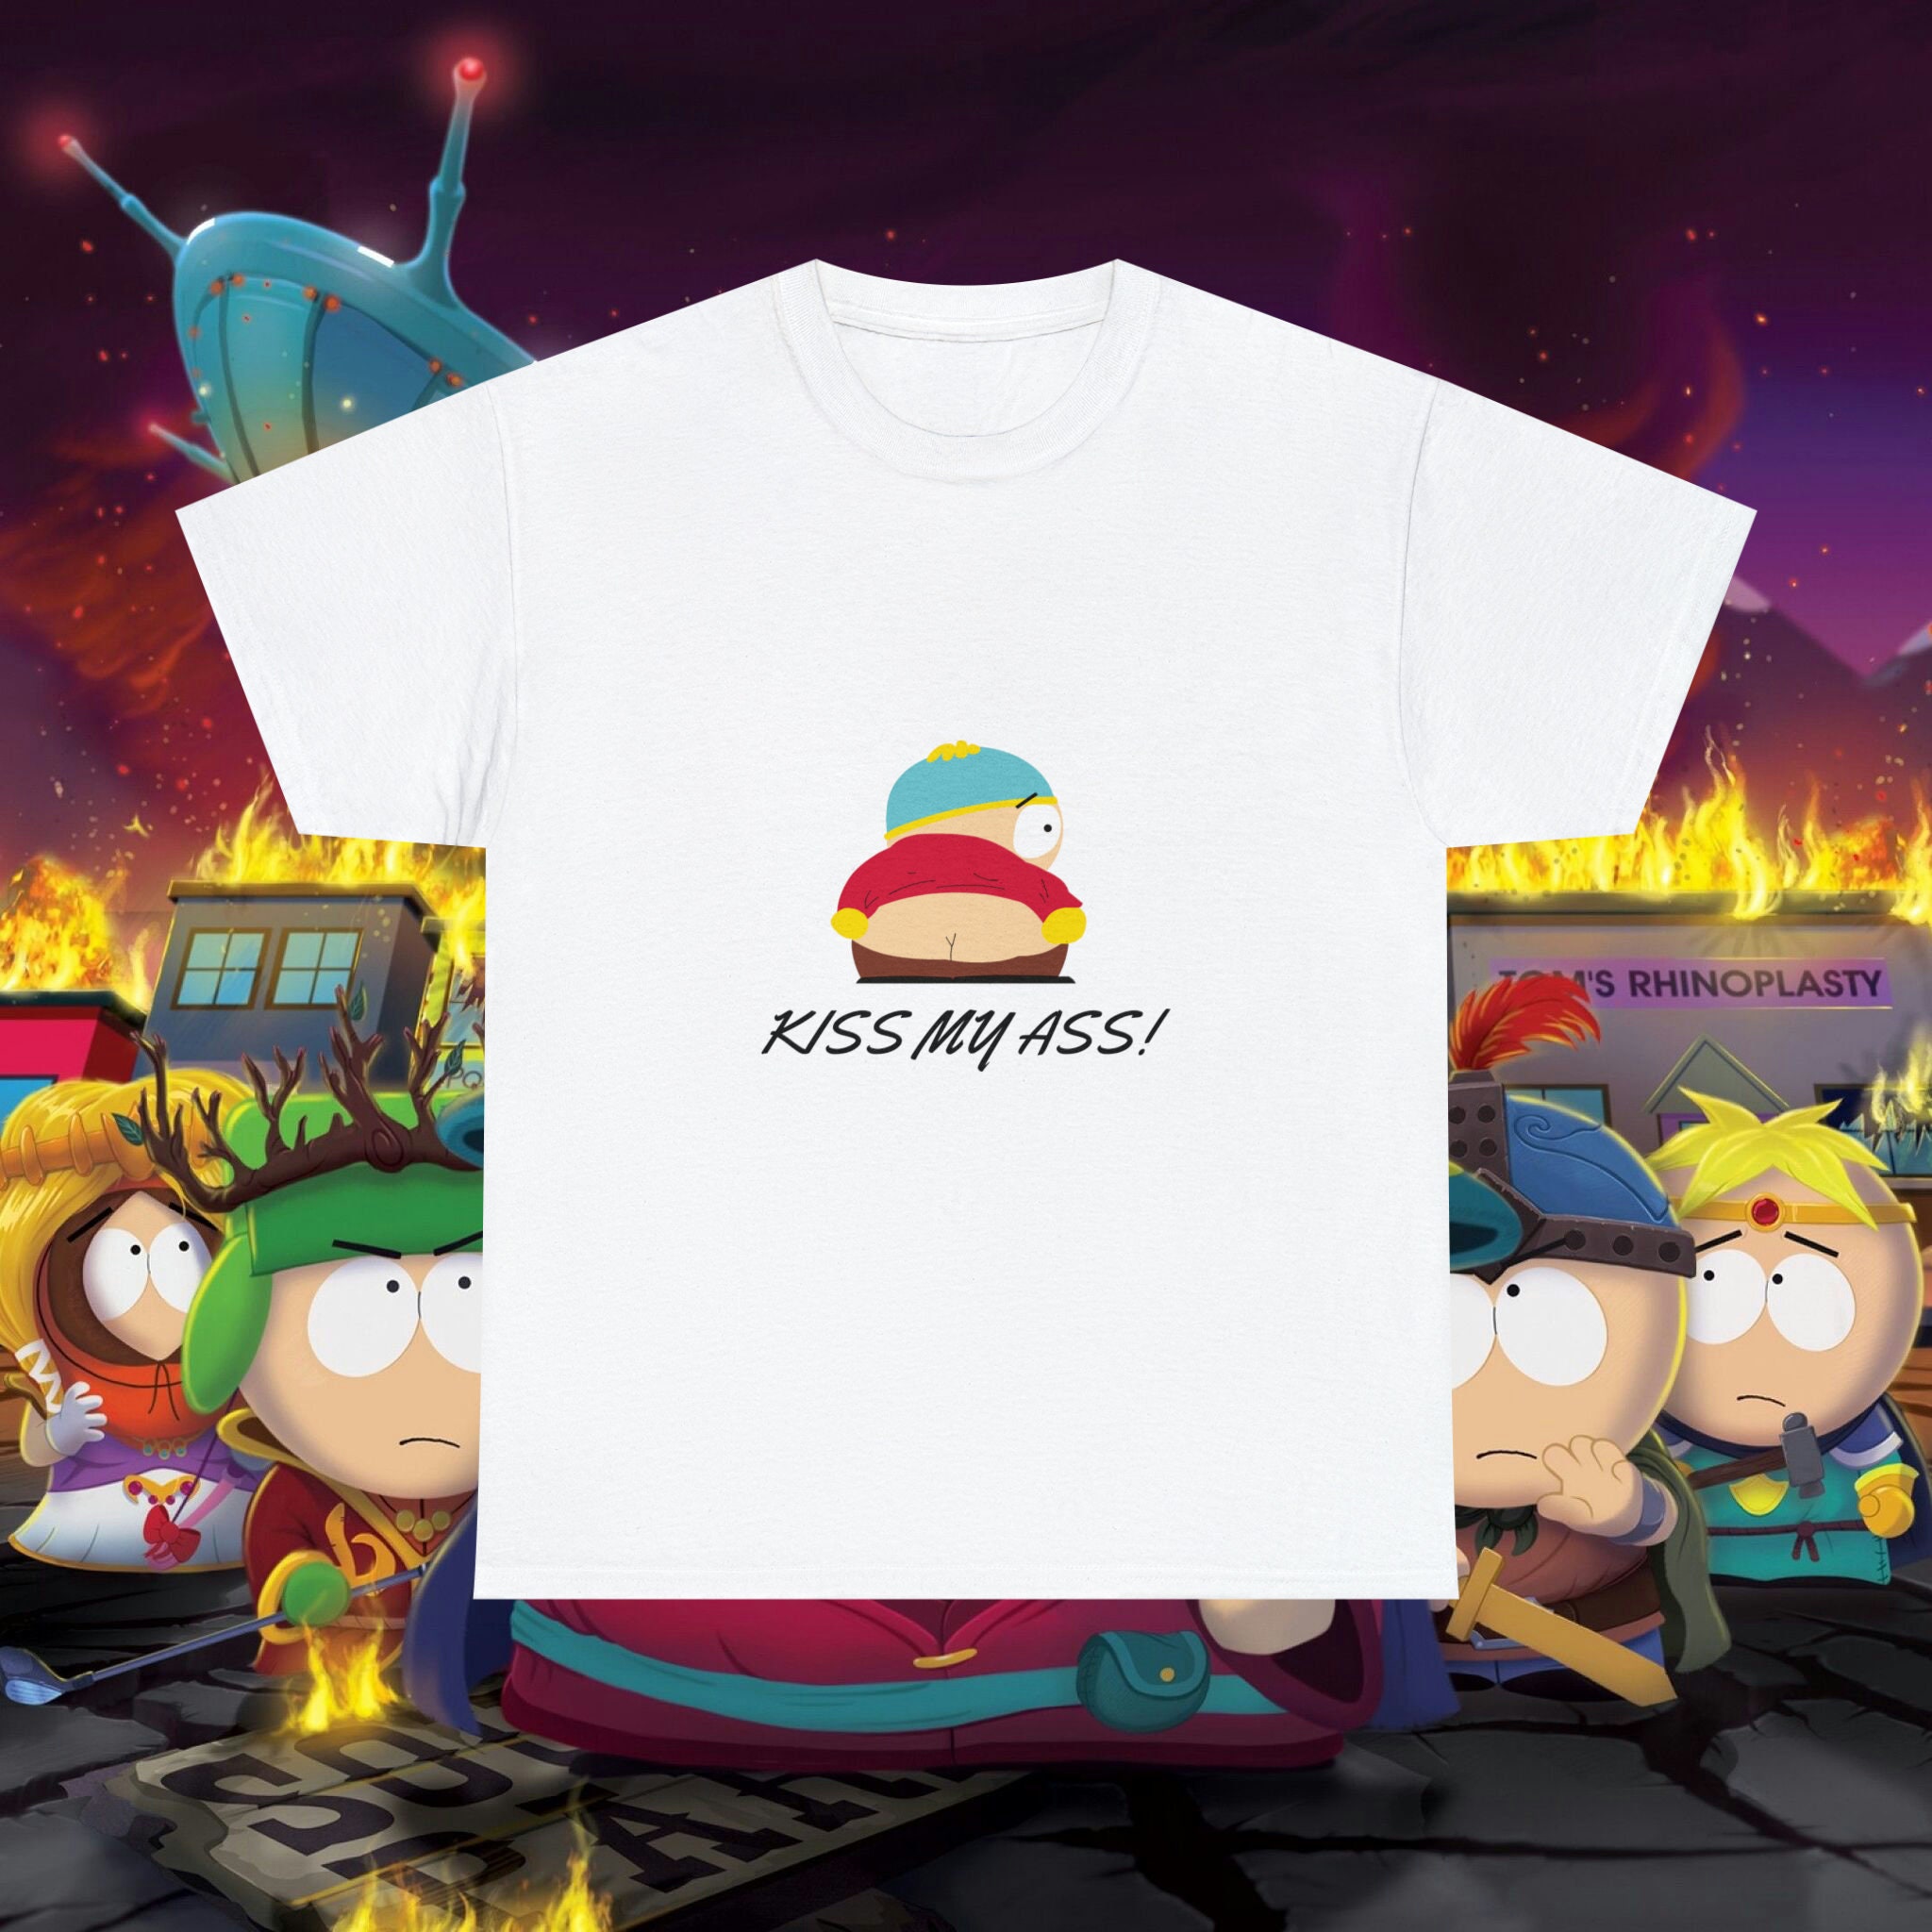 T and P Graphic Tee of Eric Cartman in South Park the Streaming